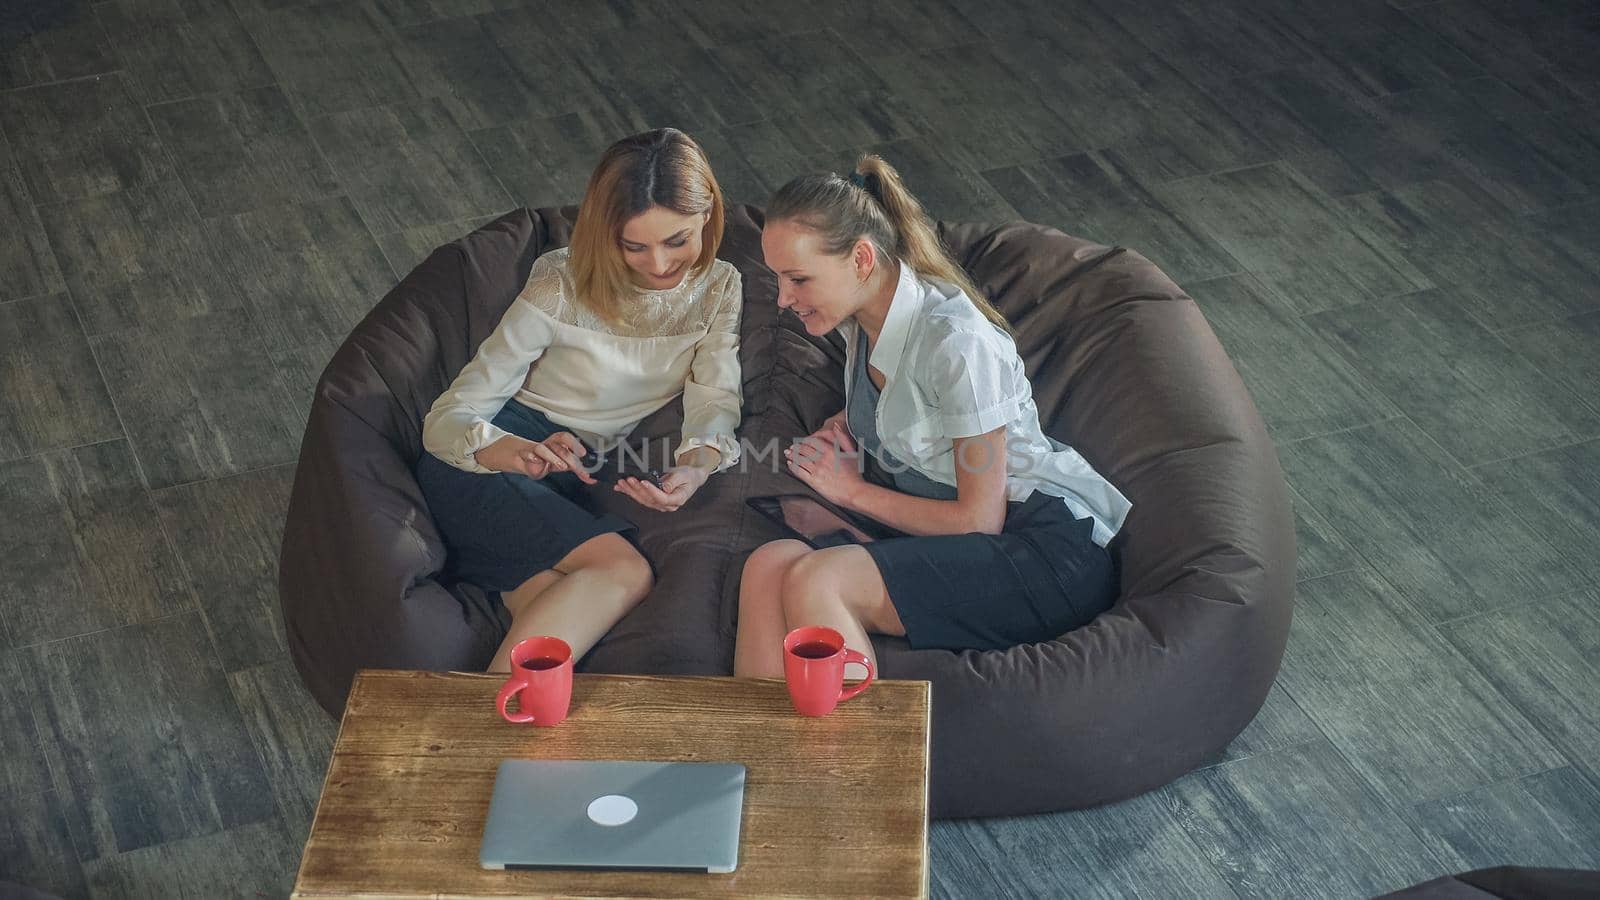 Two attractive business woman relaxing on a sofa and watching photo on the phone. Smile and discuss photos, pleasing appearance. Static video